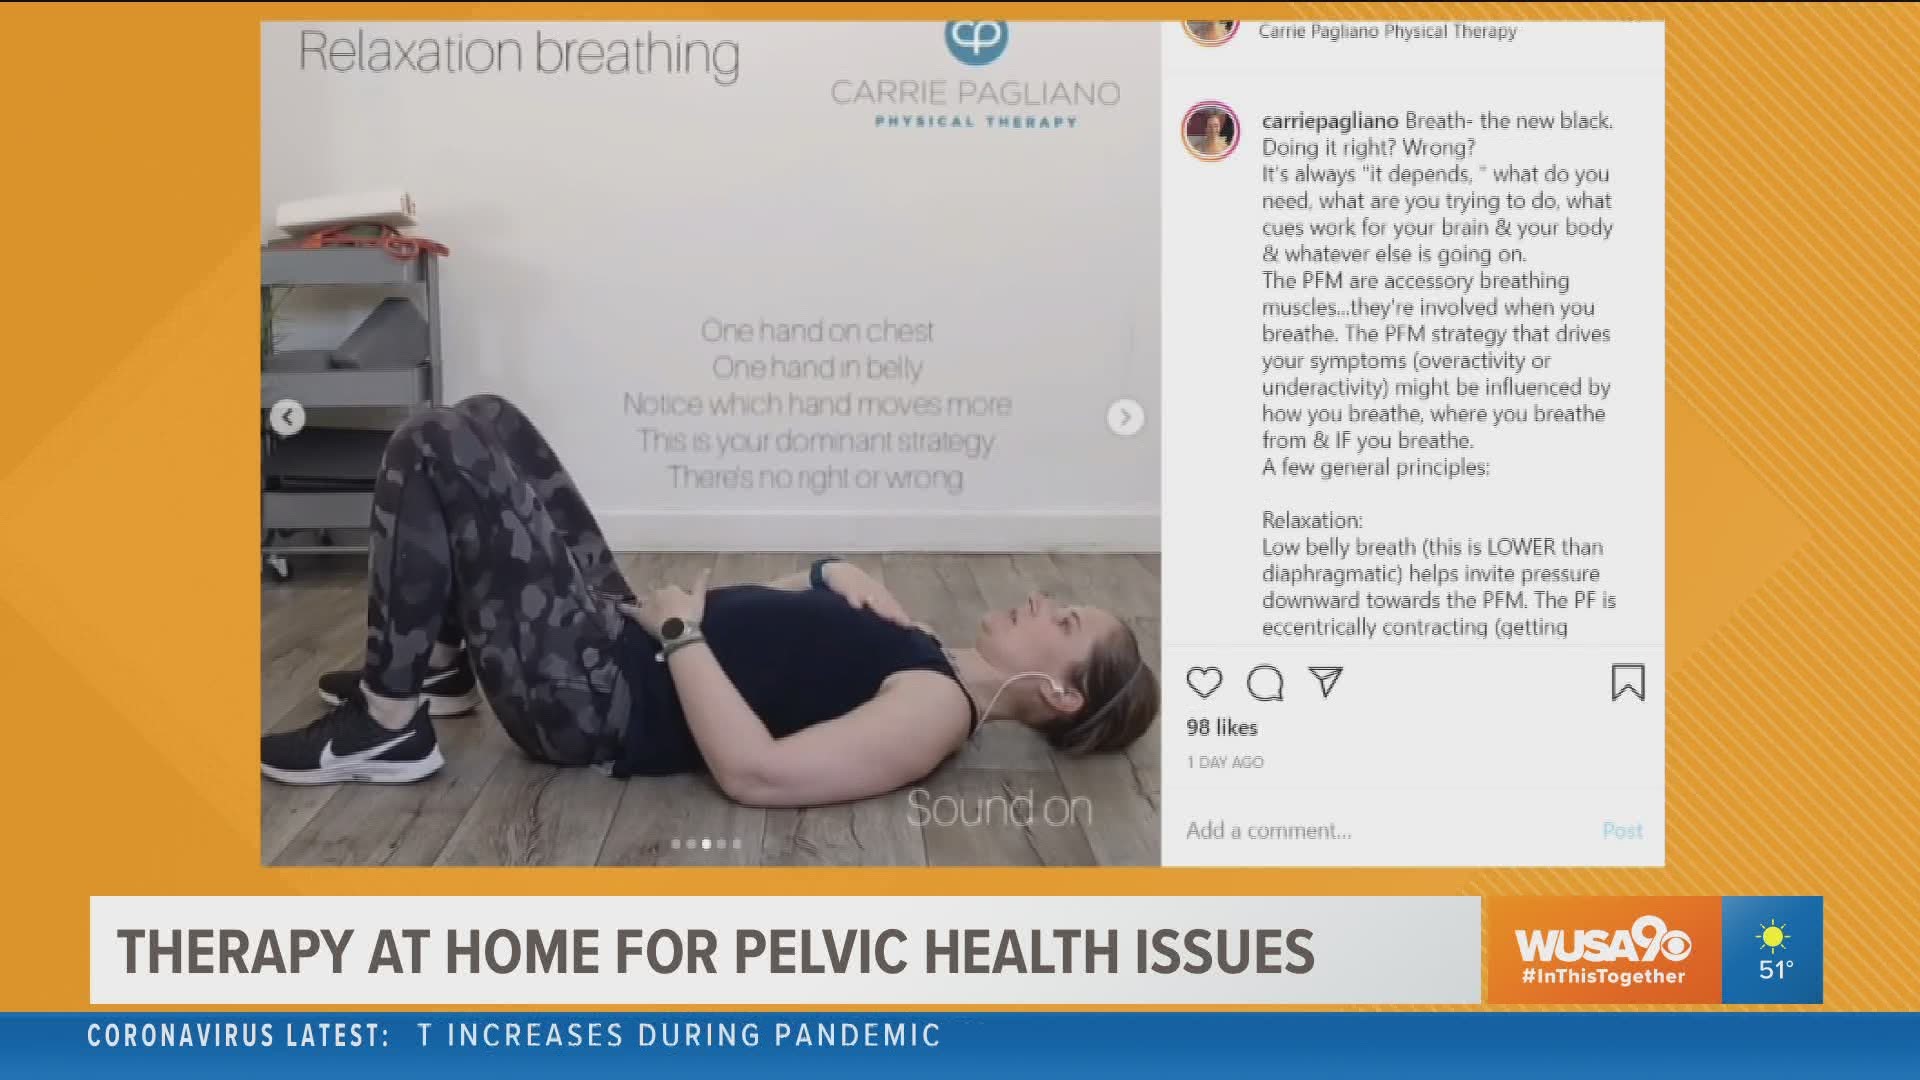 How do you manage physical therapy during the pandemic? Physical therapist and pelvic health specialist Dr. Carrie Pagliano talks about how she's helping clients.